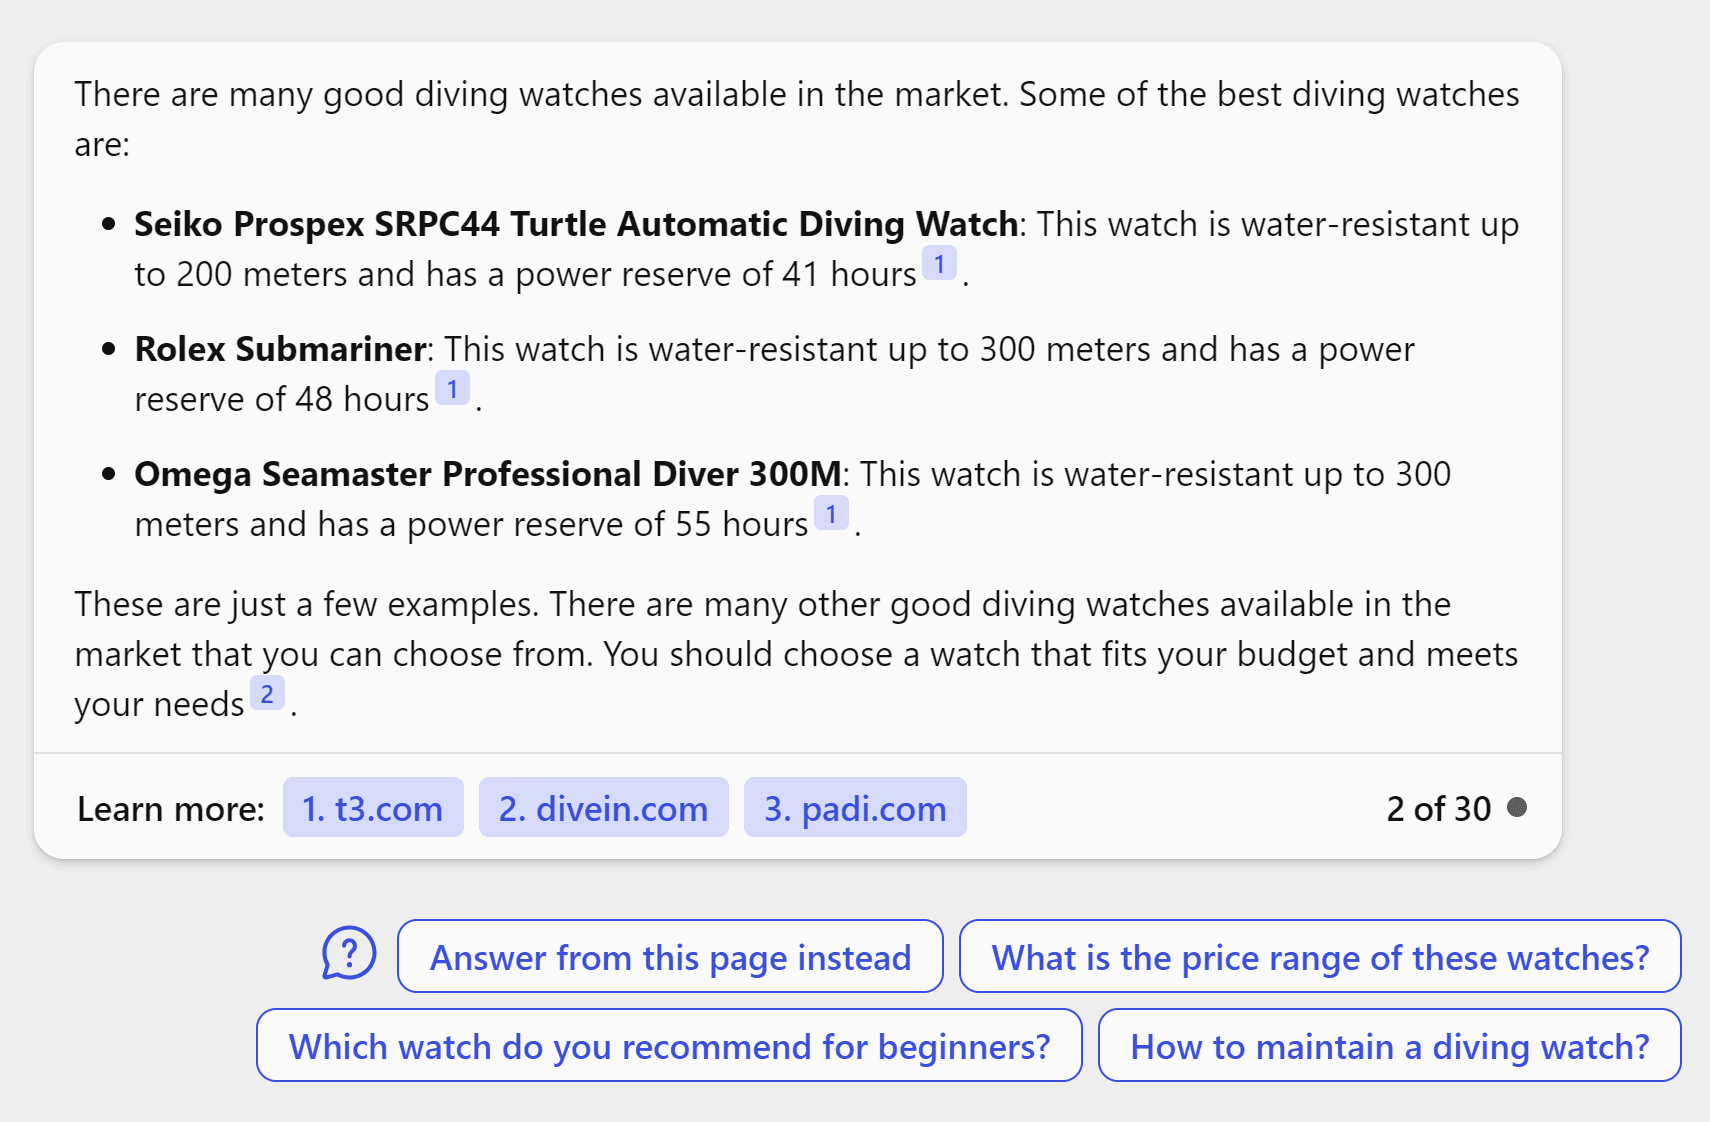 Bing chatbot suggesting luxury diving watches.